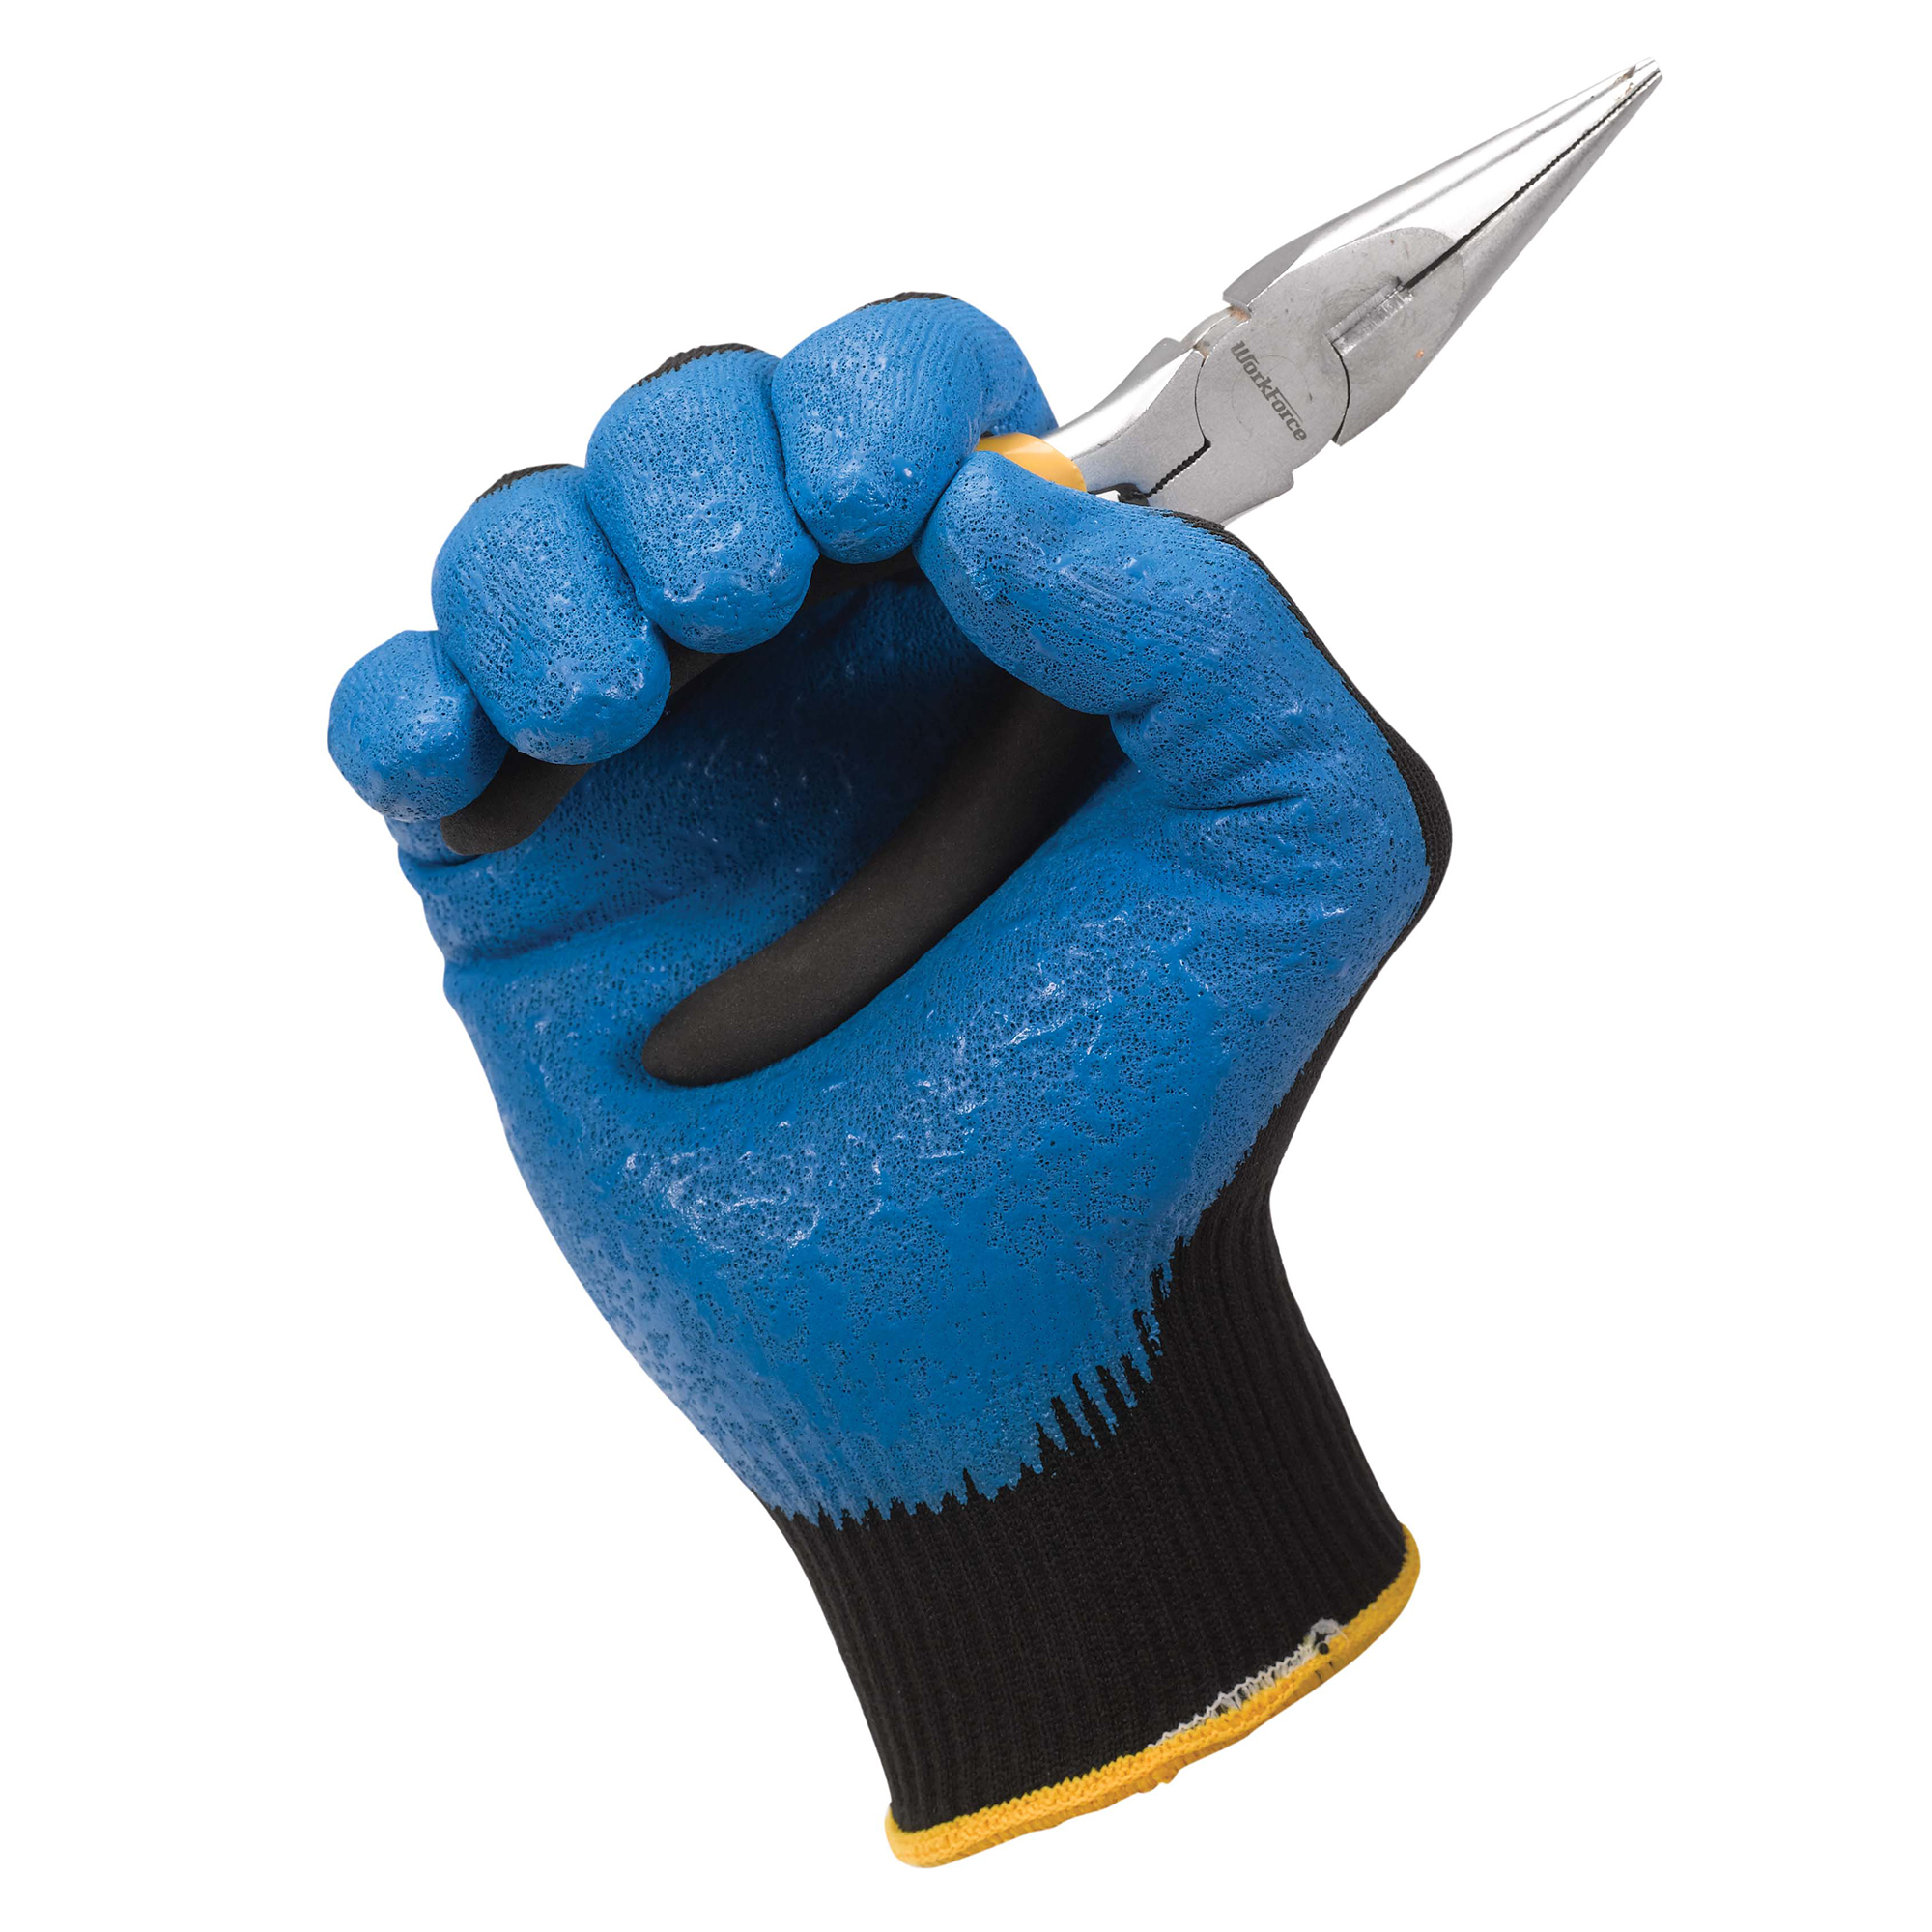 Picture of G40 Nitrile Coated Gloves, Large/Size 9, Blue, 12 Pairs